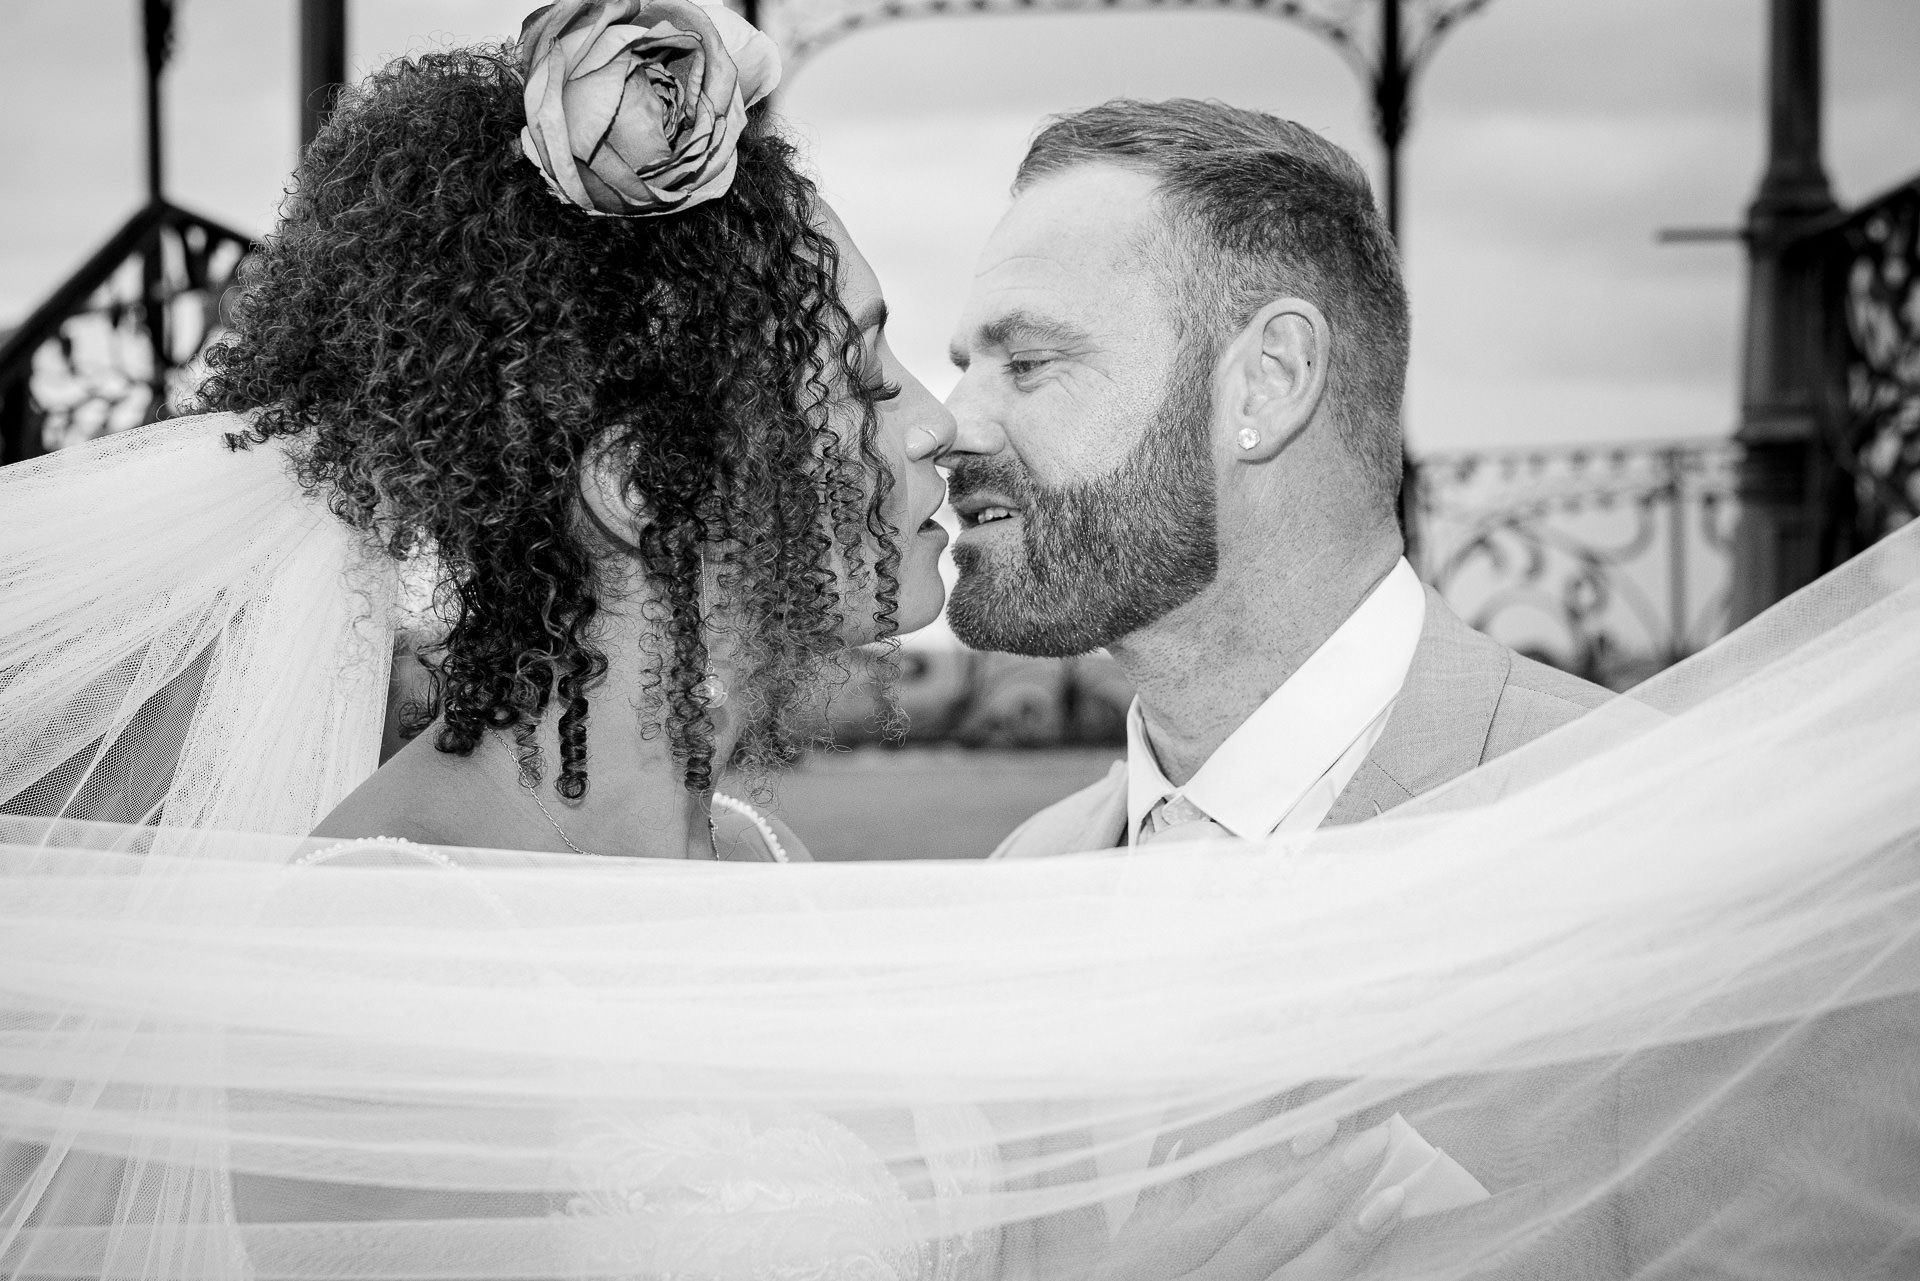 black and white image of the bride and groom about to kiss